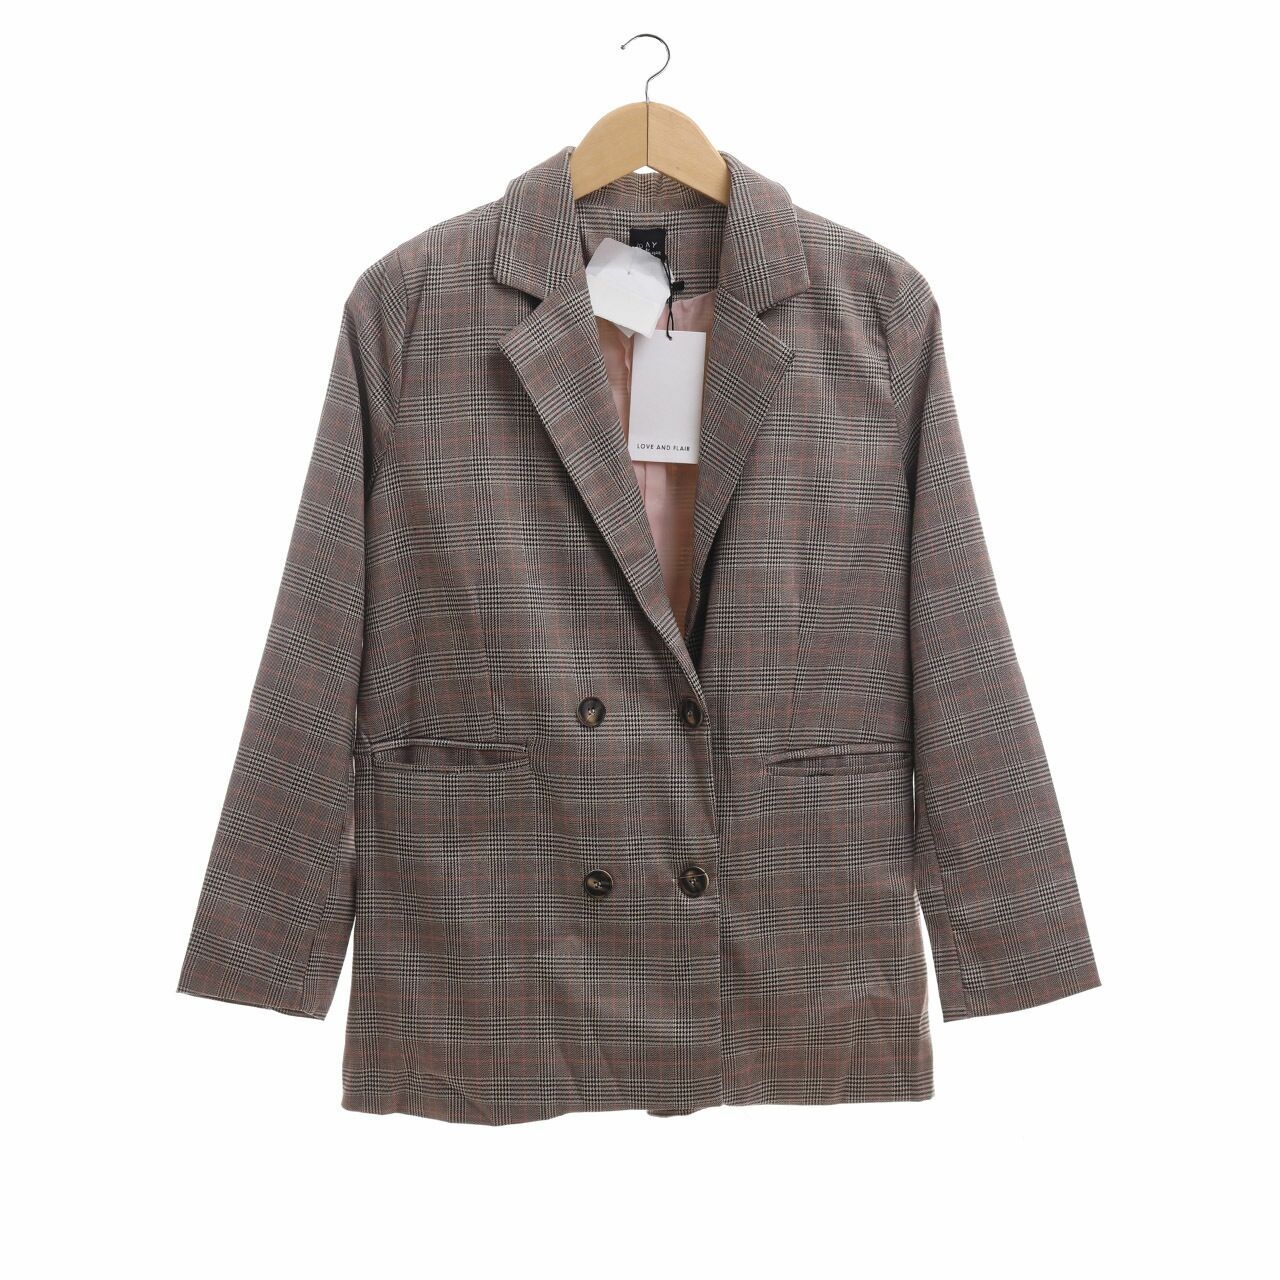 Day by Love and Flair Brown Houndstooth Blazer